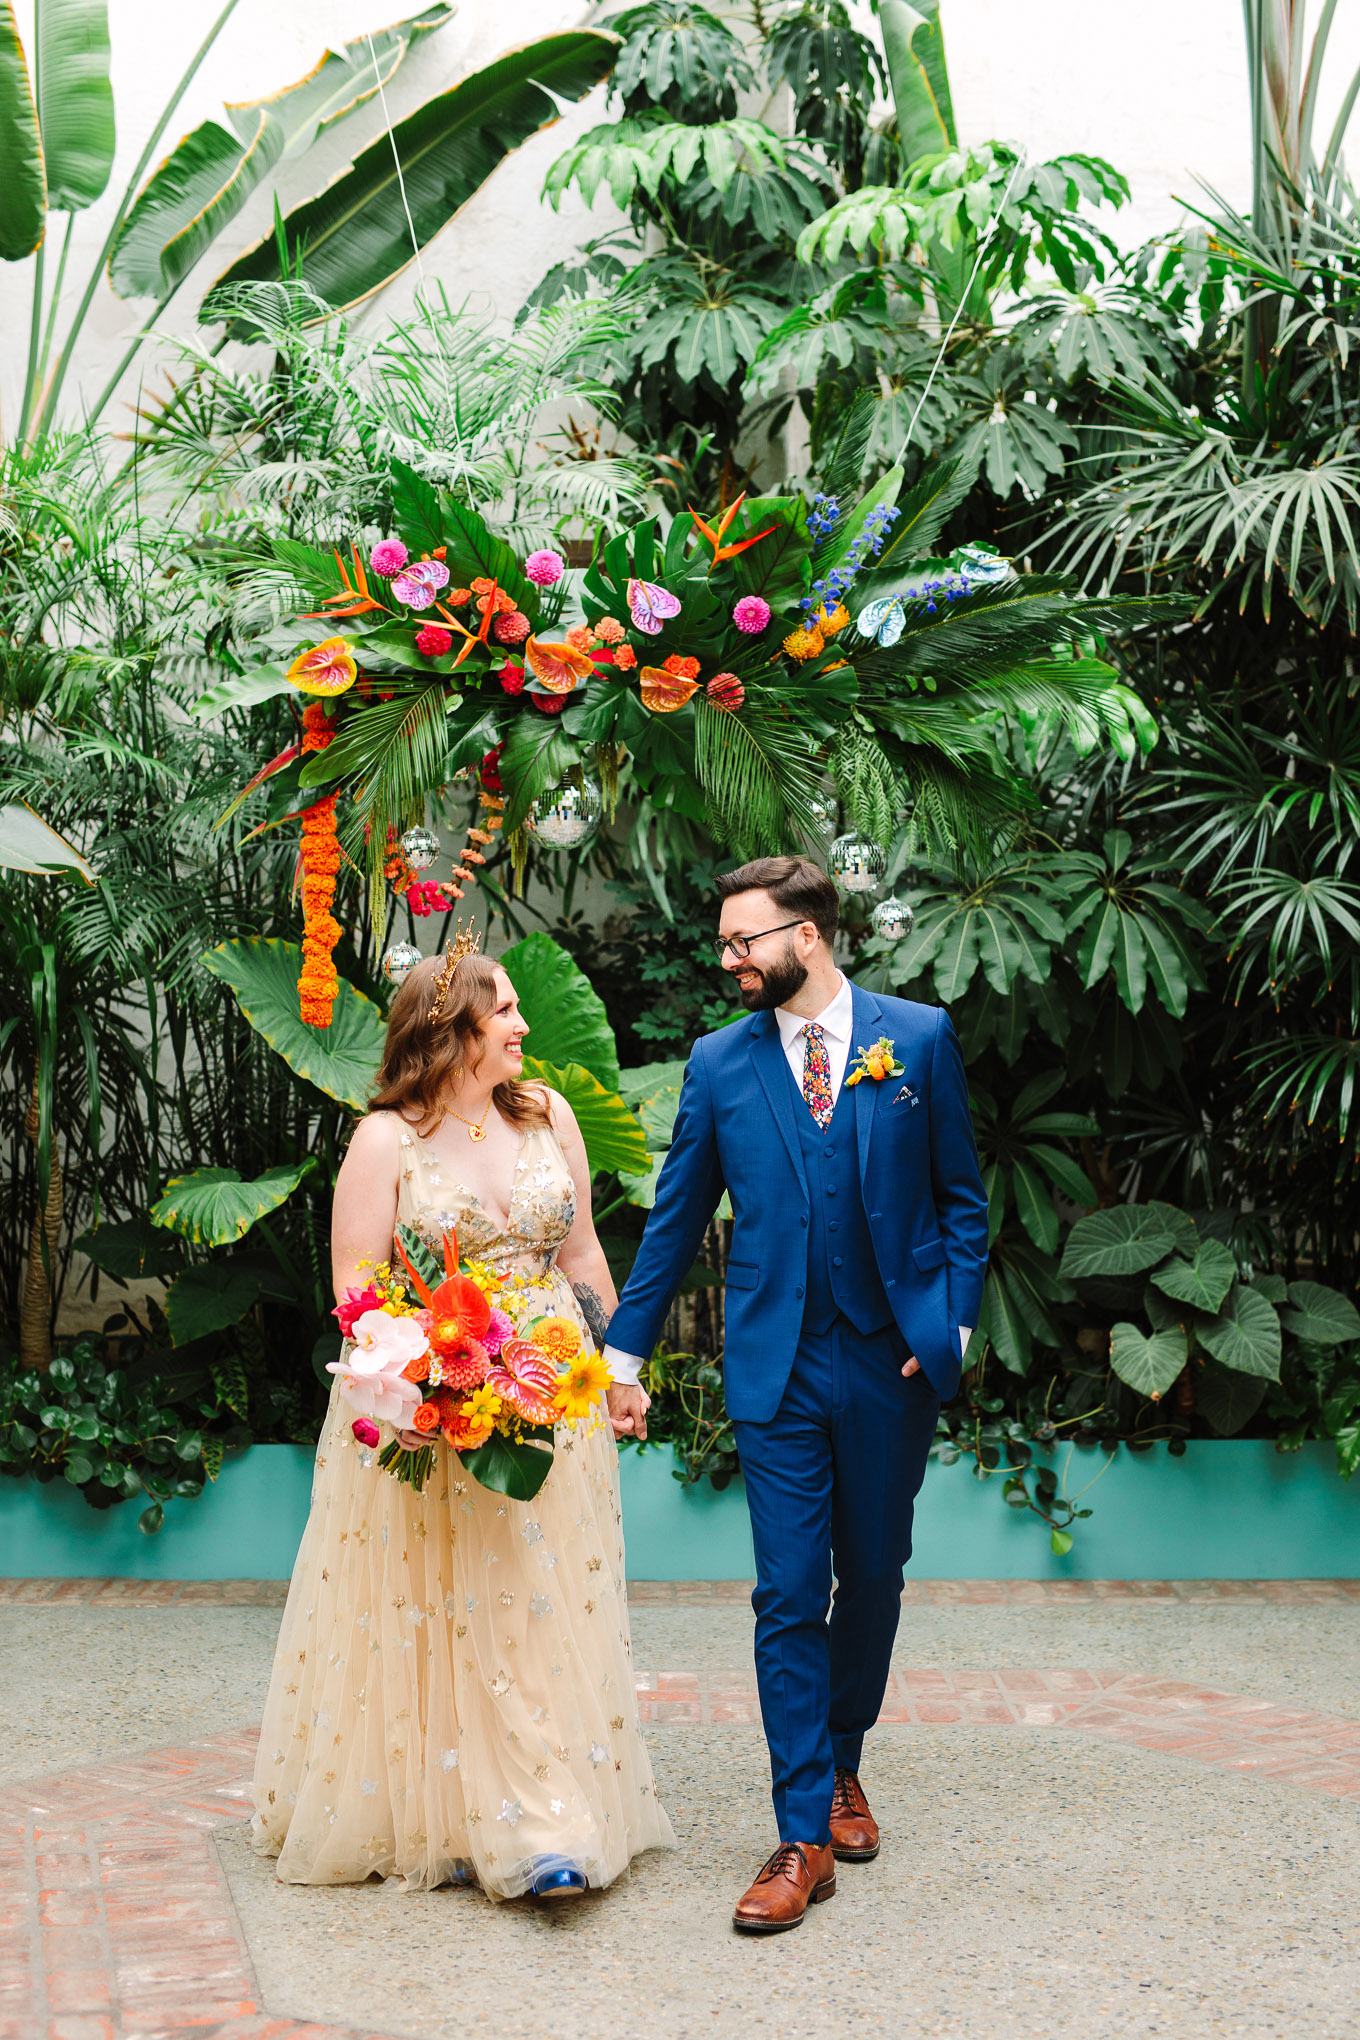 Bride and groom walking in front of tropical backdrop with disco balls | Colorful Downtown Los Angeles Valentine Wedding | Los Angeles wedding photographer | #losangeleswedding #colorfulwedding #DTLA #valentinedtla   Source: Mary Costa Photography | Los Angeles